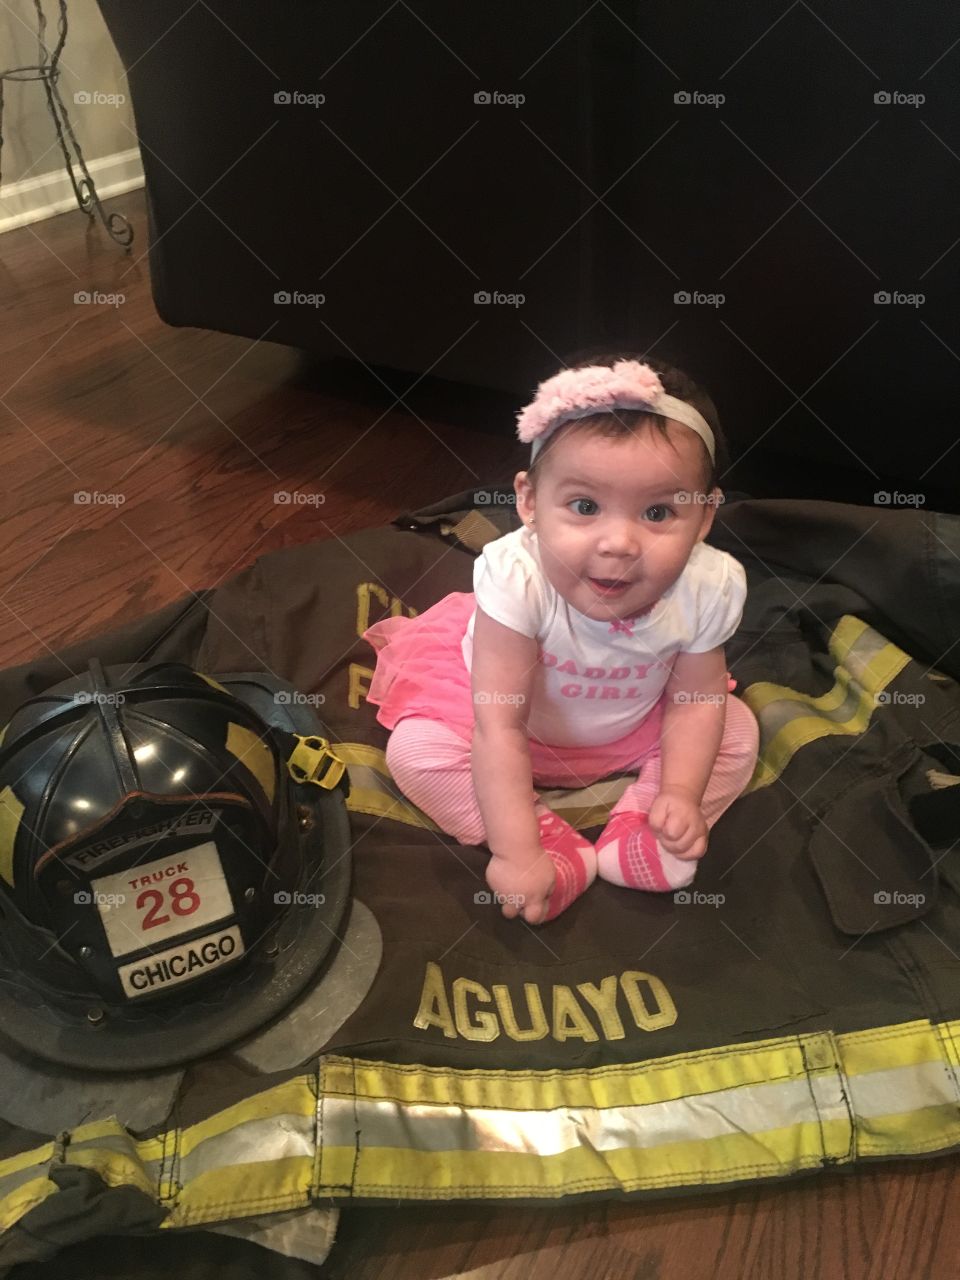 Firefighter Granddaughter! Grandpa's little princess knows just who her hero is! 